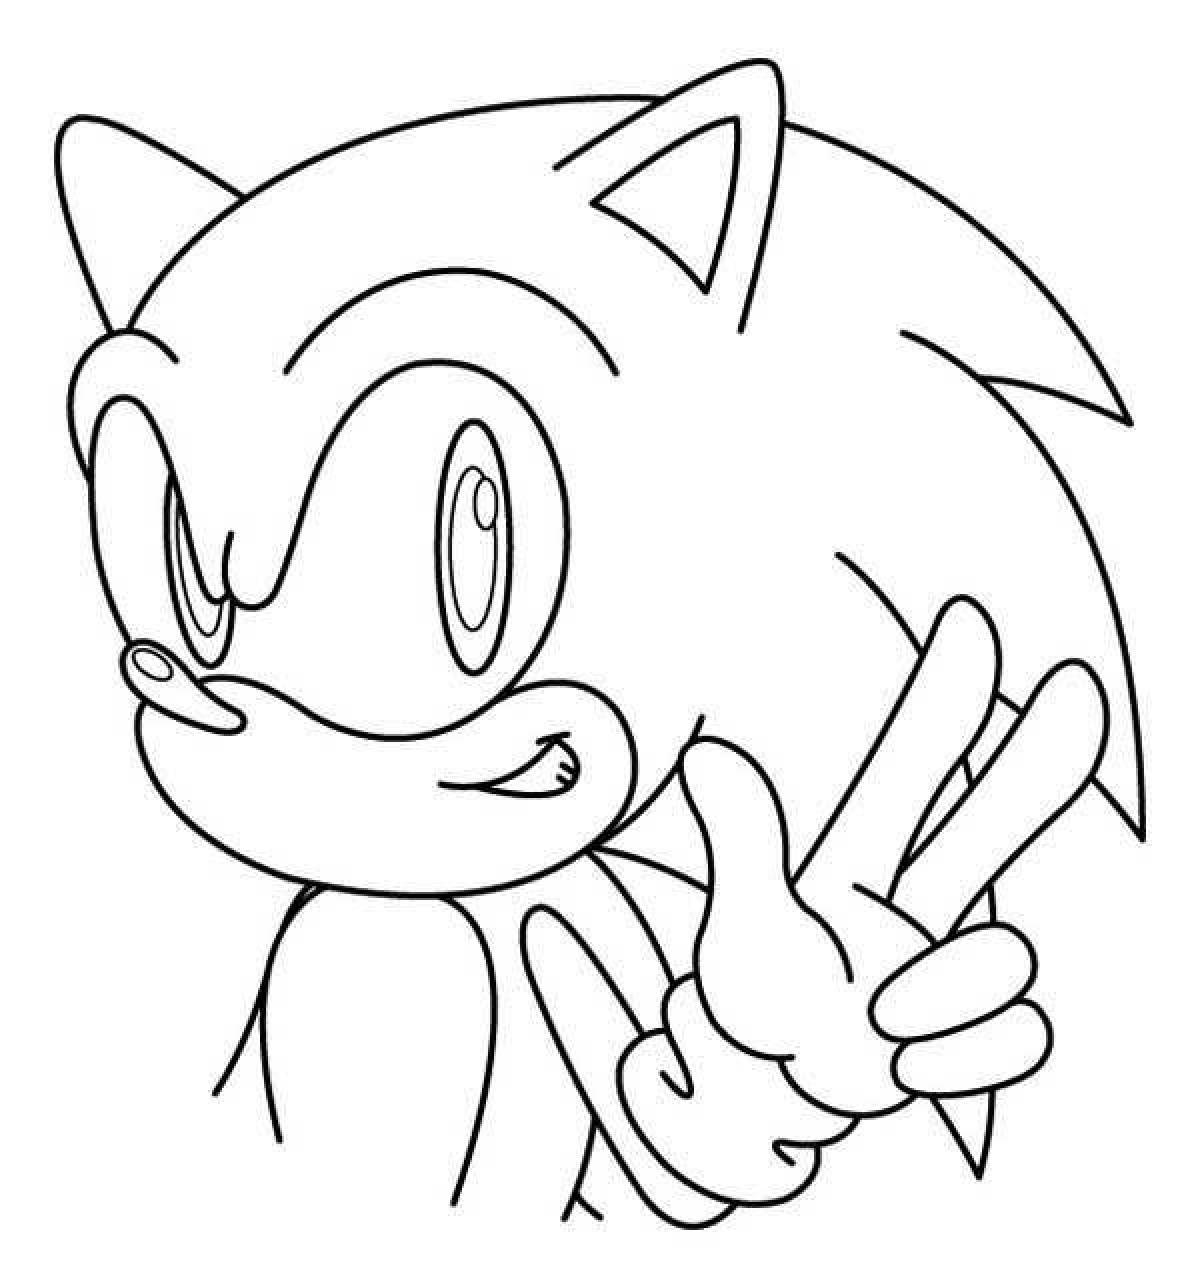 Sonic igzy's dazzling coloring book